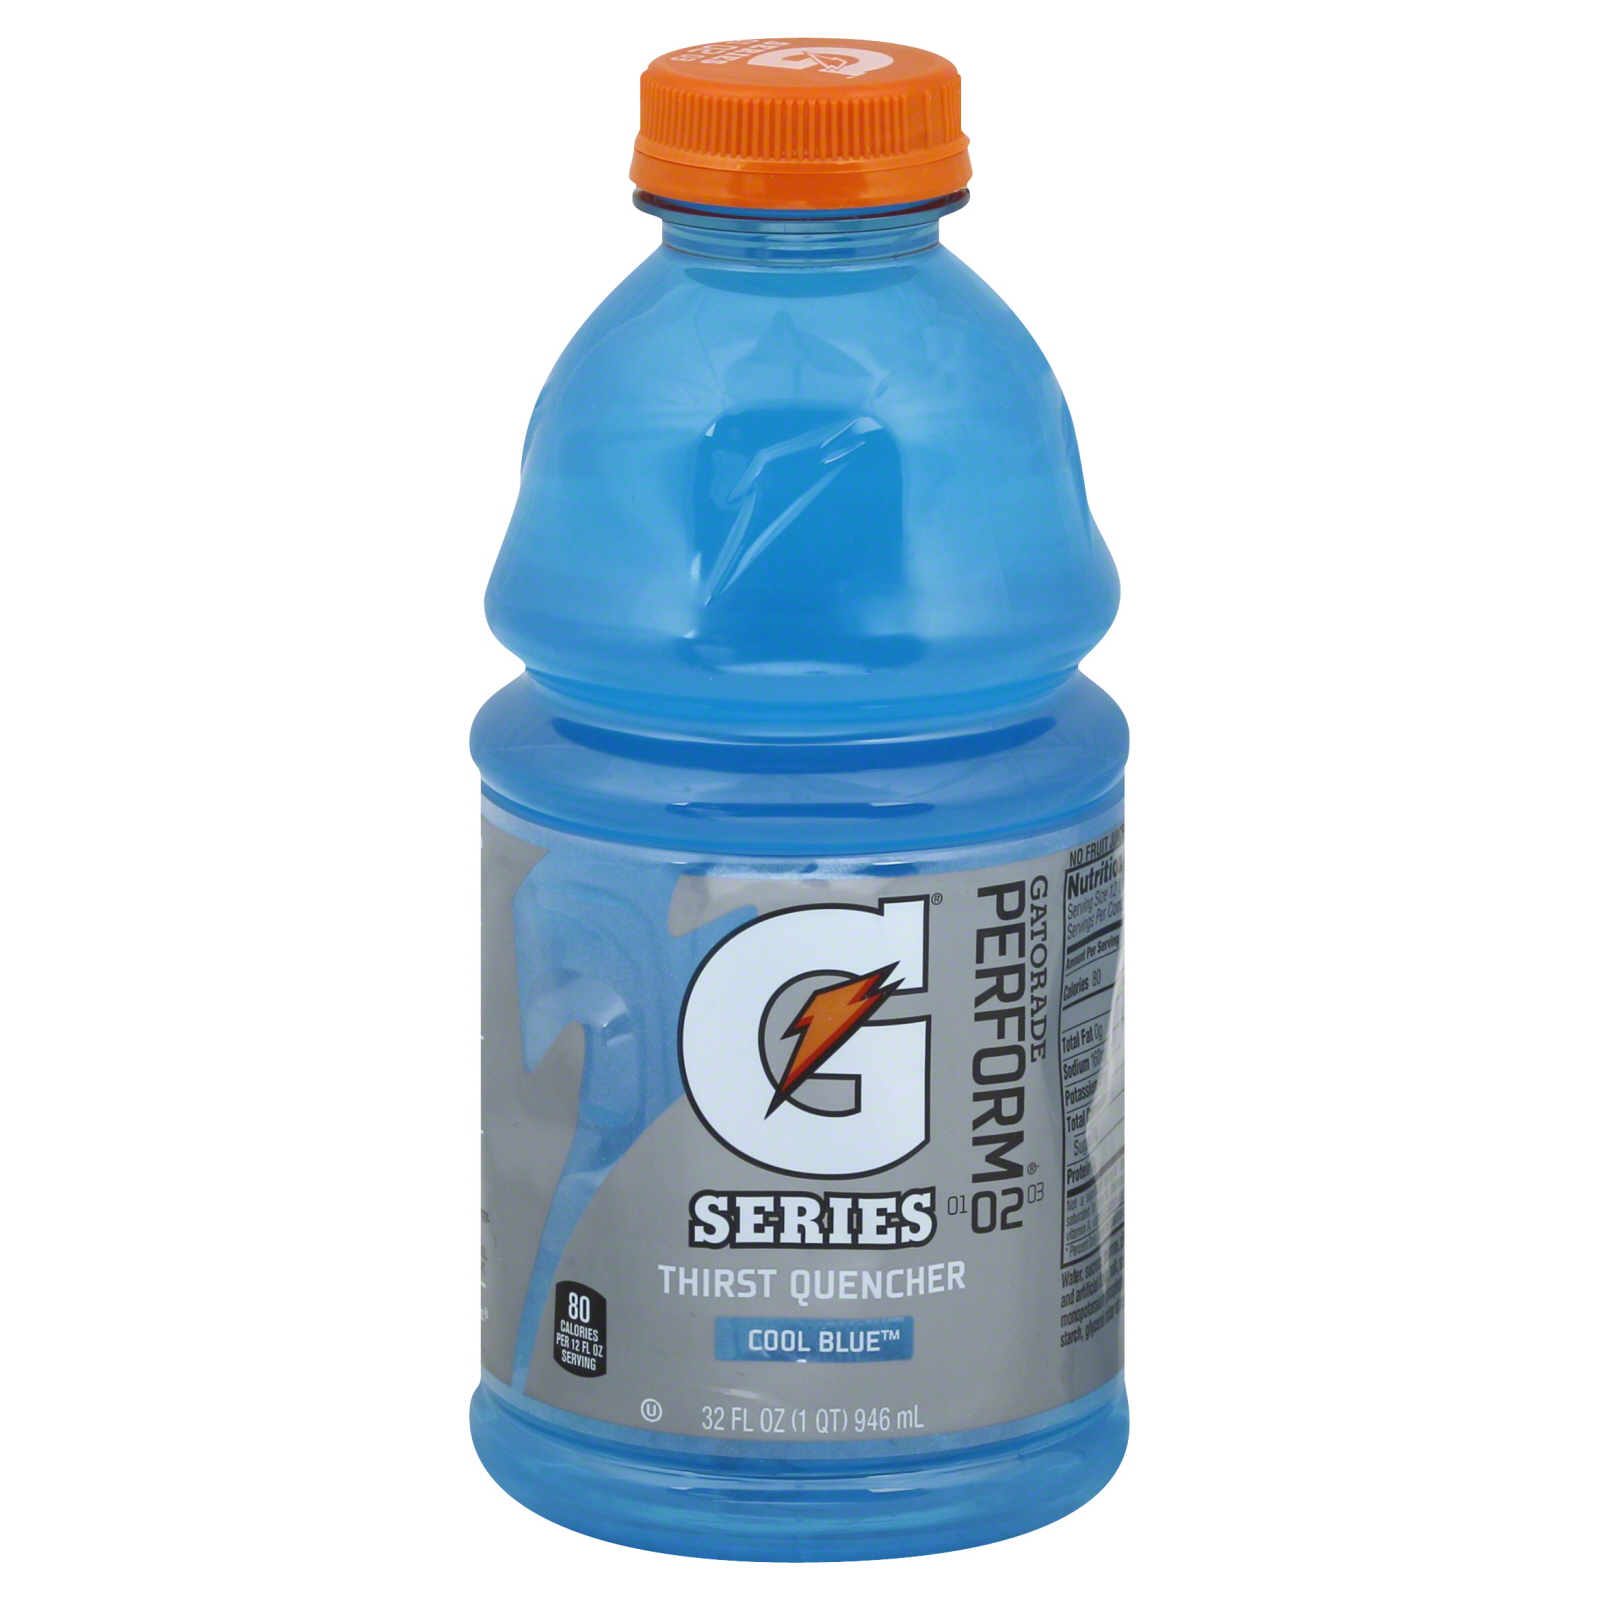 Gatorade G Series Thirst Quencher, 02 Perform, Fruit Punch, 64 fl oz (2 qt) 1.89 lt   Food & Grocery   Beverages   Sports & Energy Drinks